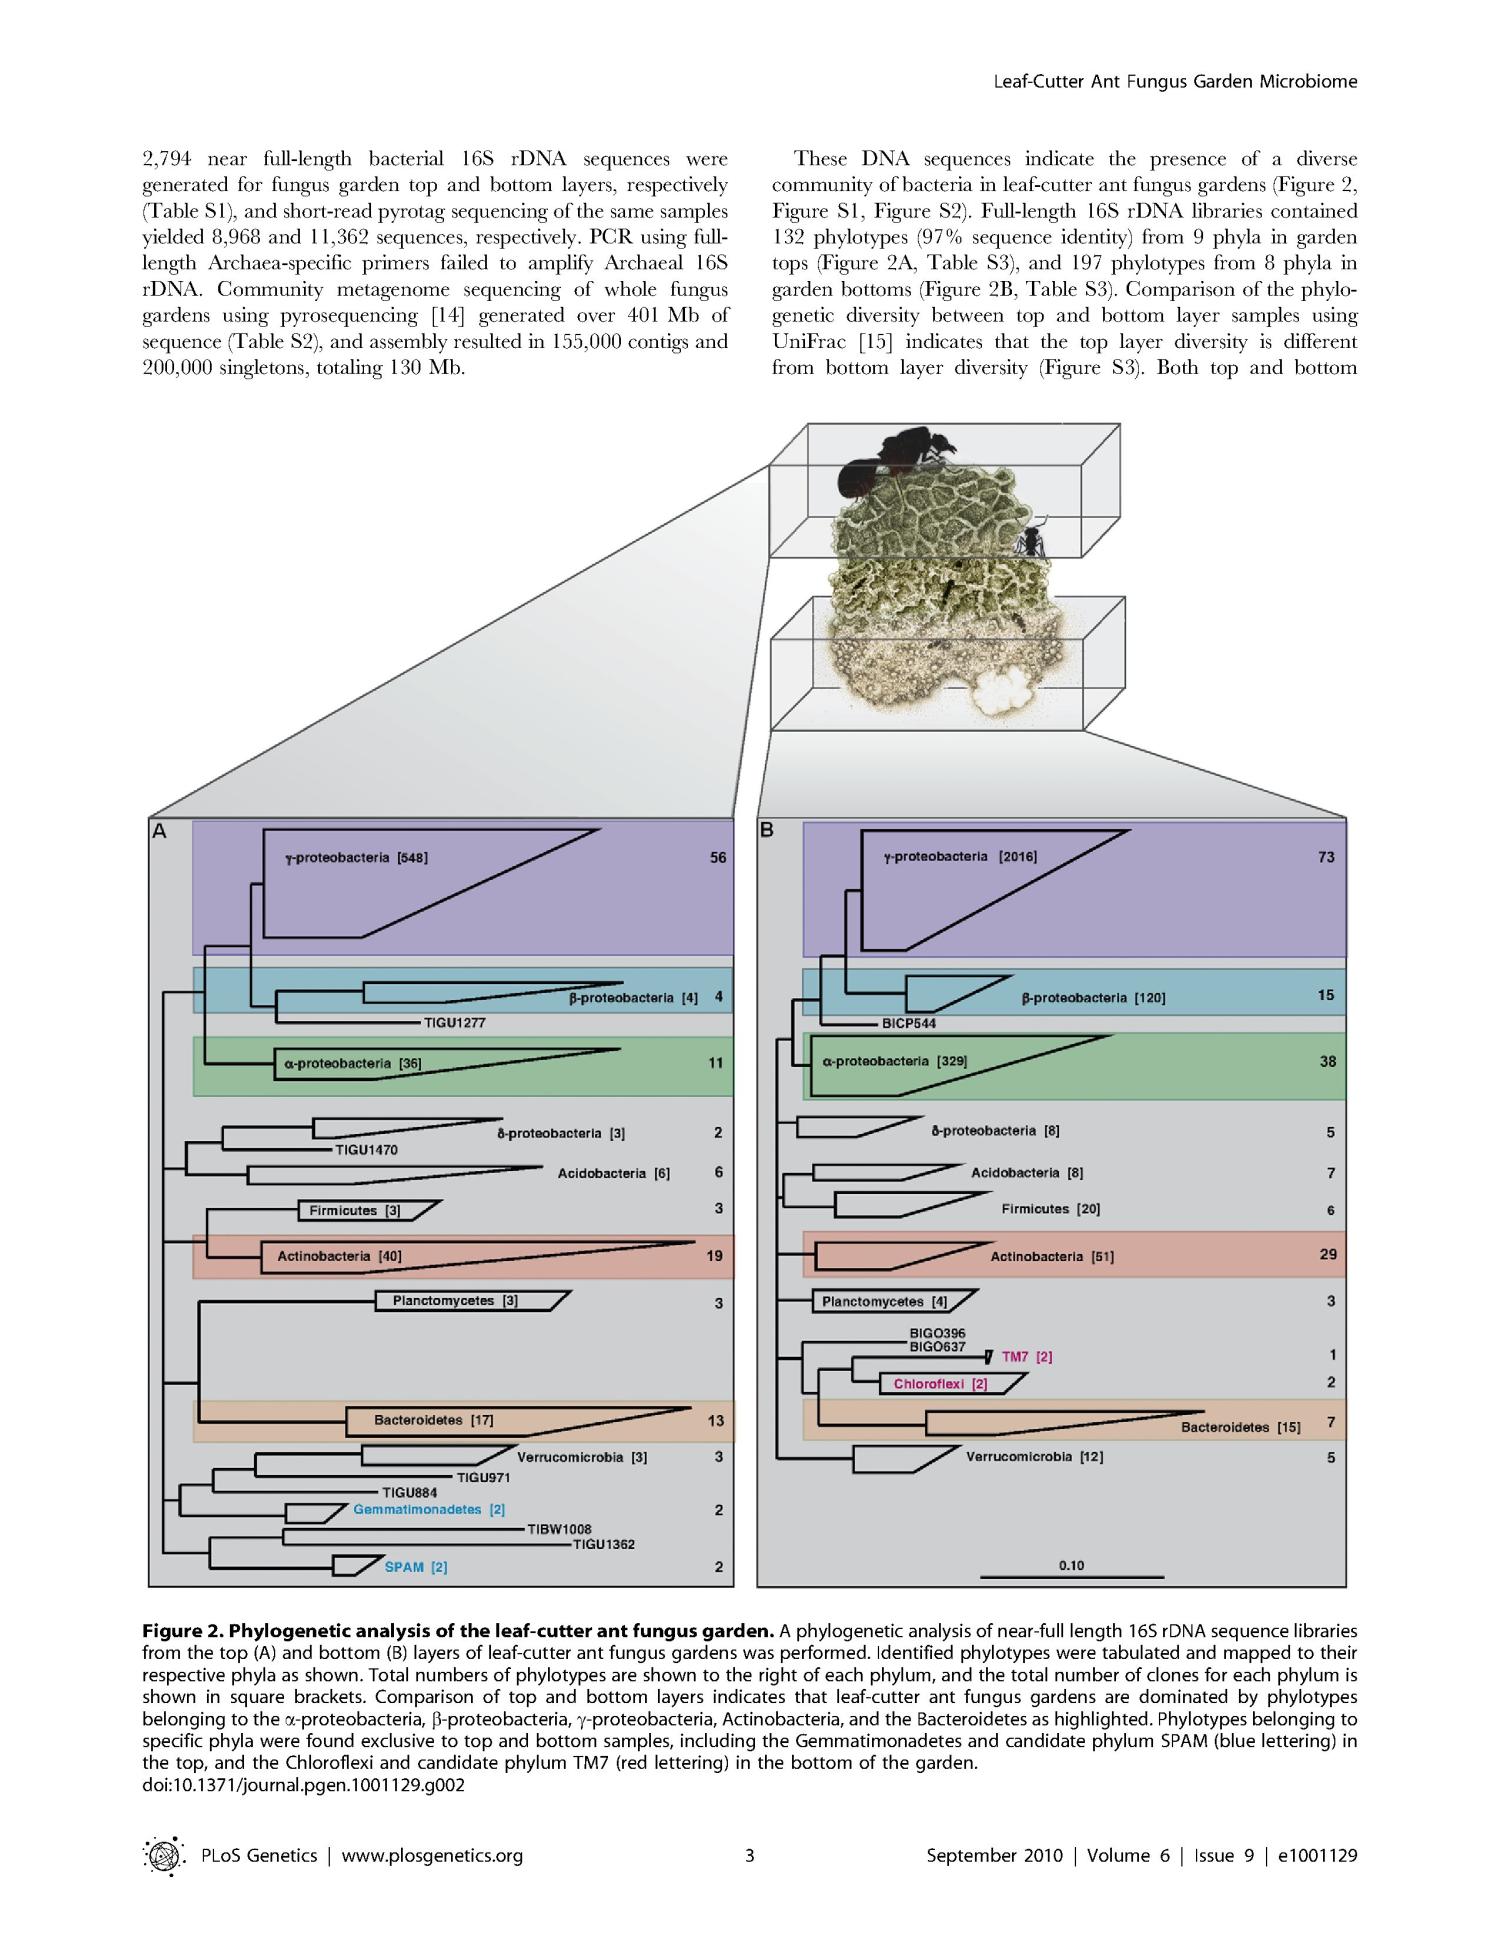 An Insect Herbivore Microbiome with High Plant Biomass-Degrading Capacity
                                                
                                                    [Sequence #]: 3 of 14
                                                